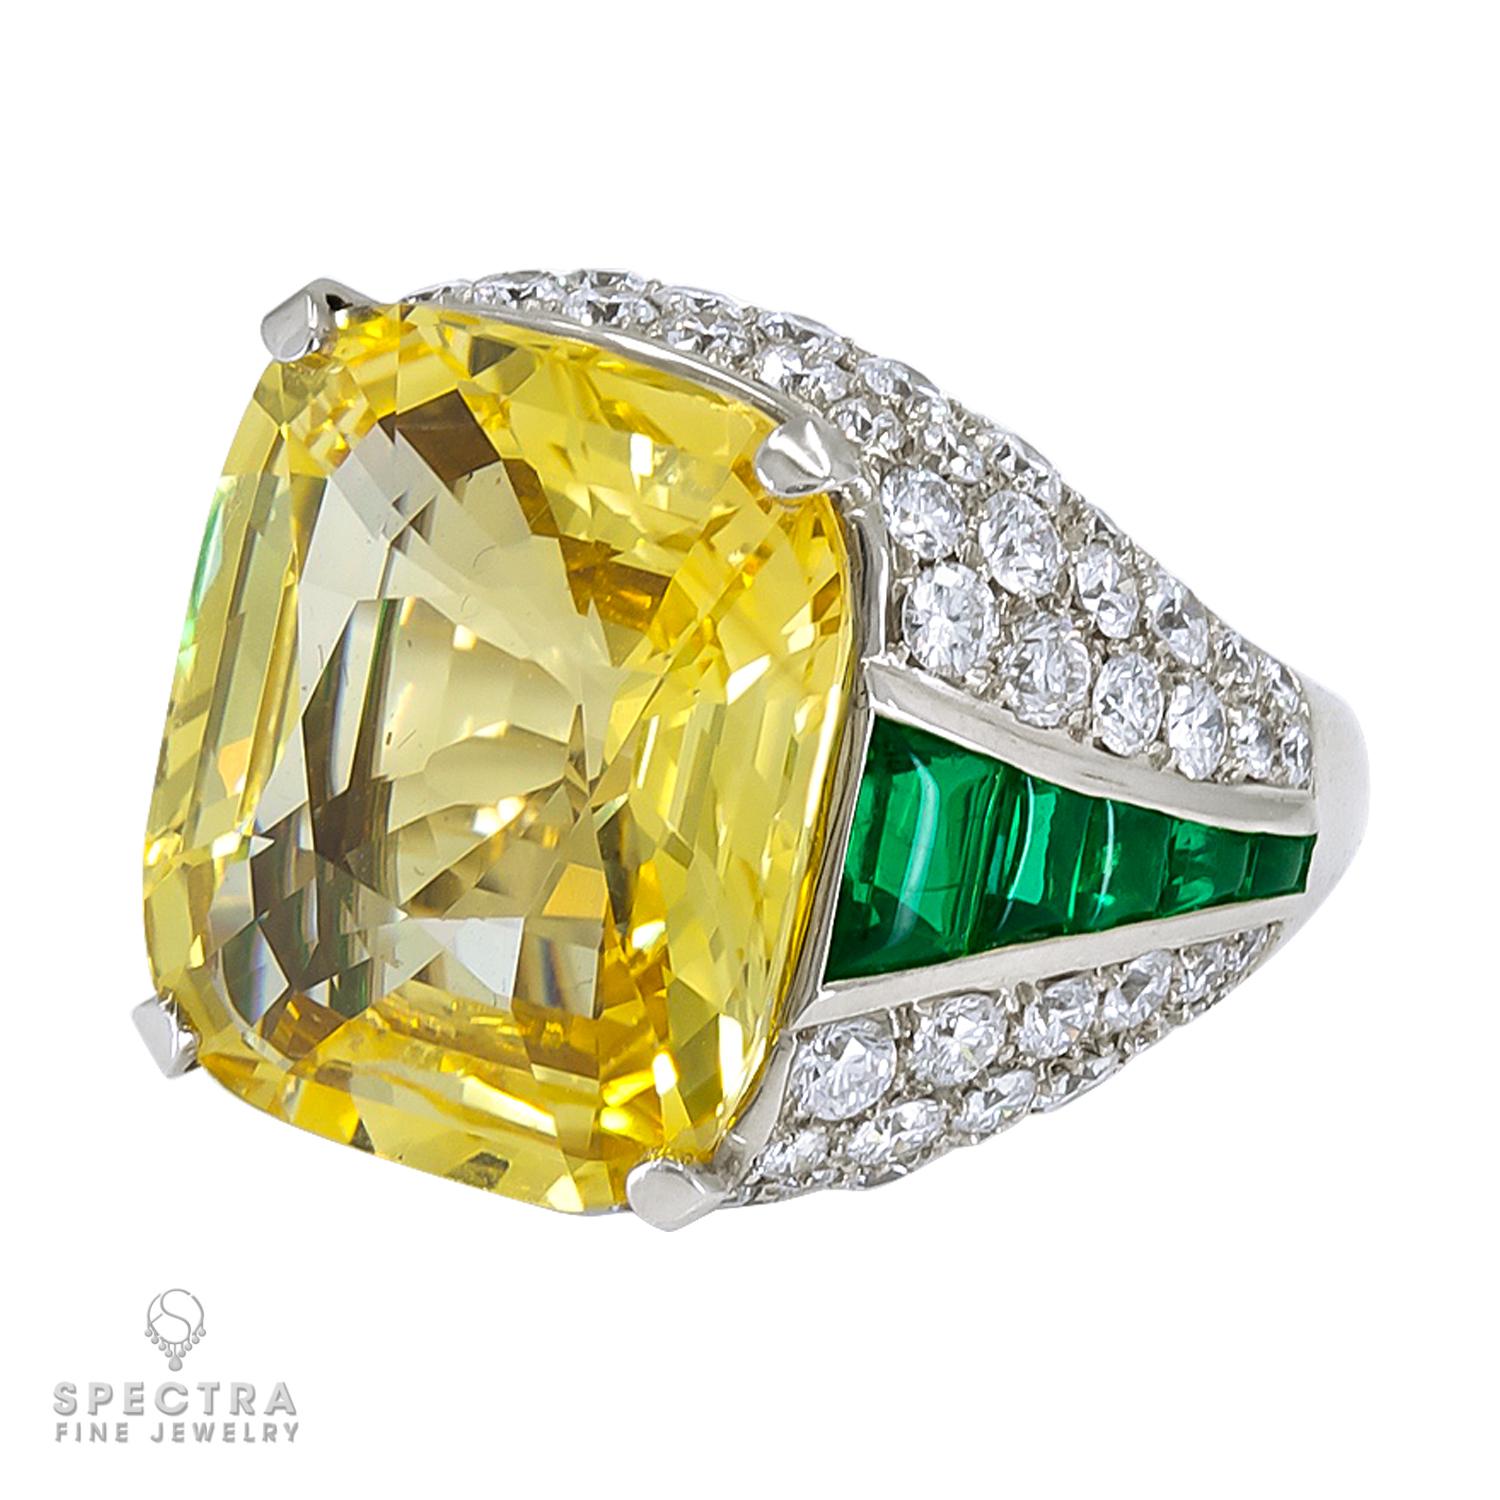 This breathtaking ring showcases a magnificent cushion-cut yellow sapphire, weighing 19.06 carats, set within a sparkling circular-cut diamond surround. The vibrant yellow hue of the sapphire is complemented by the brilliance of the diamonds,